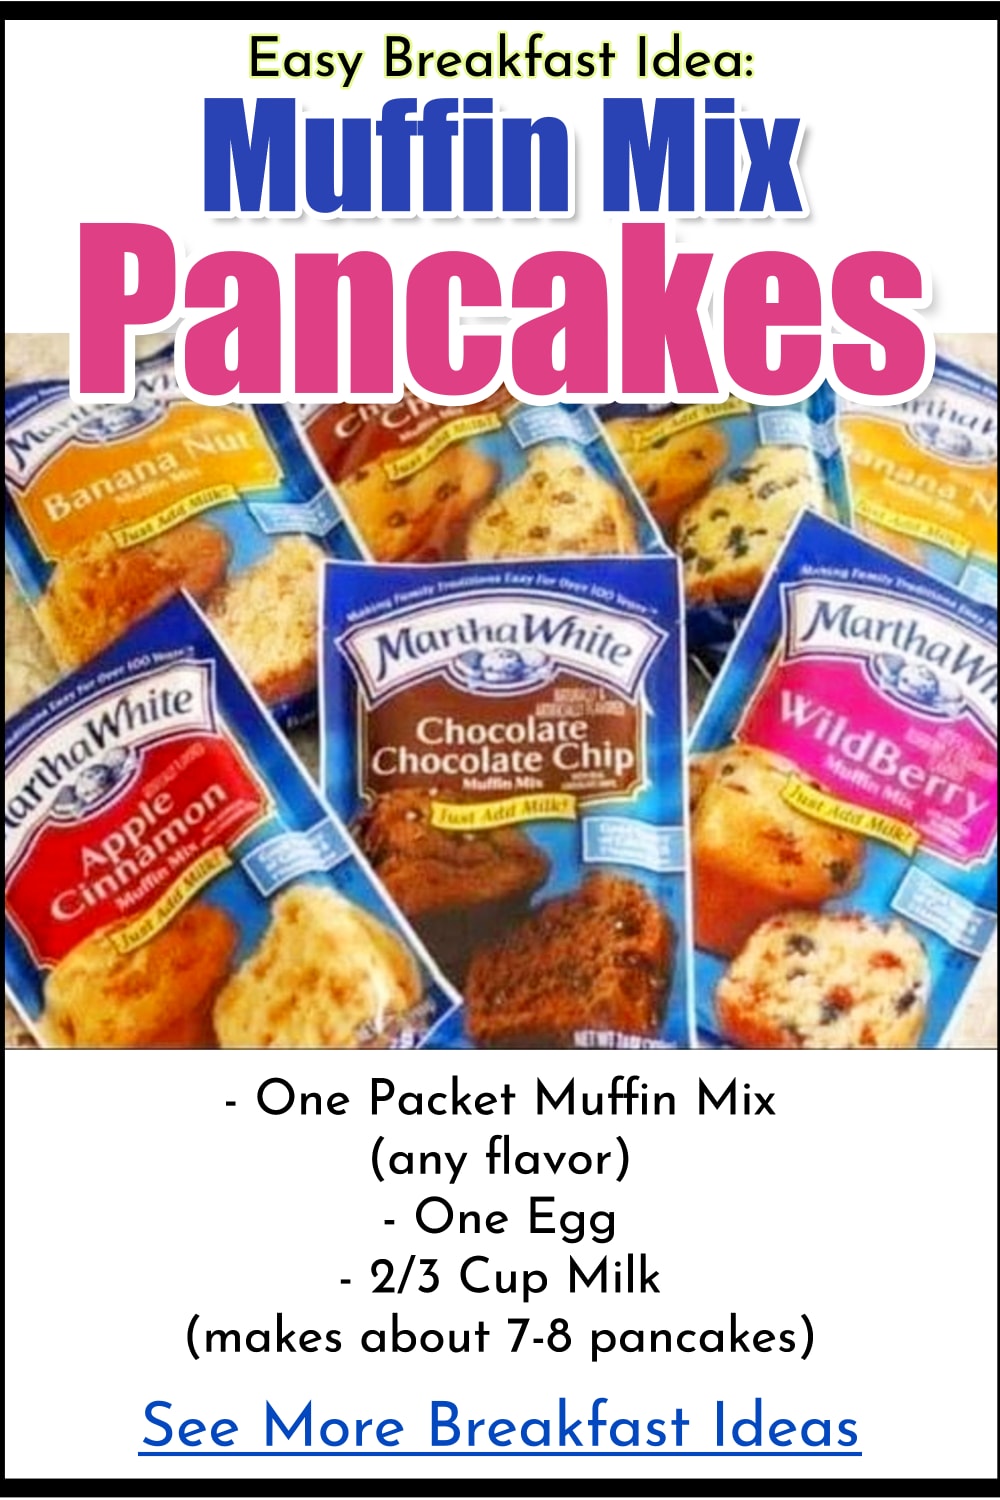 Easy breakfast ideas for a crowd of large group - these muffin mix pancakes are super easy to make and even picky eaters LOVE them